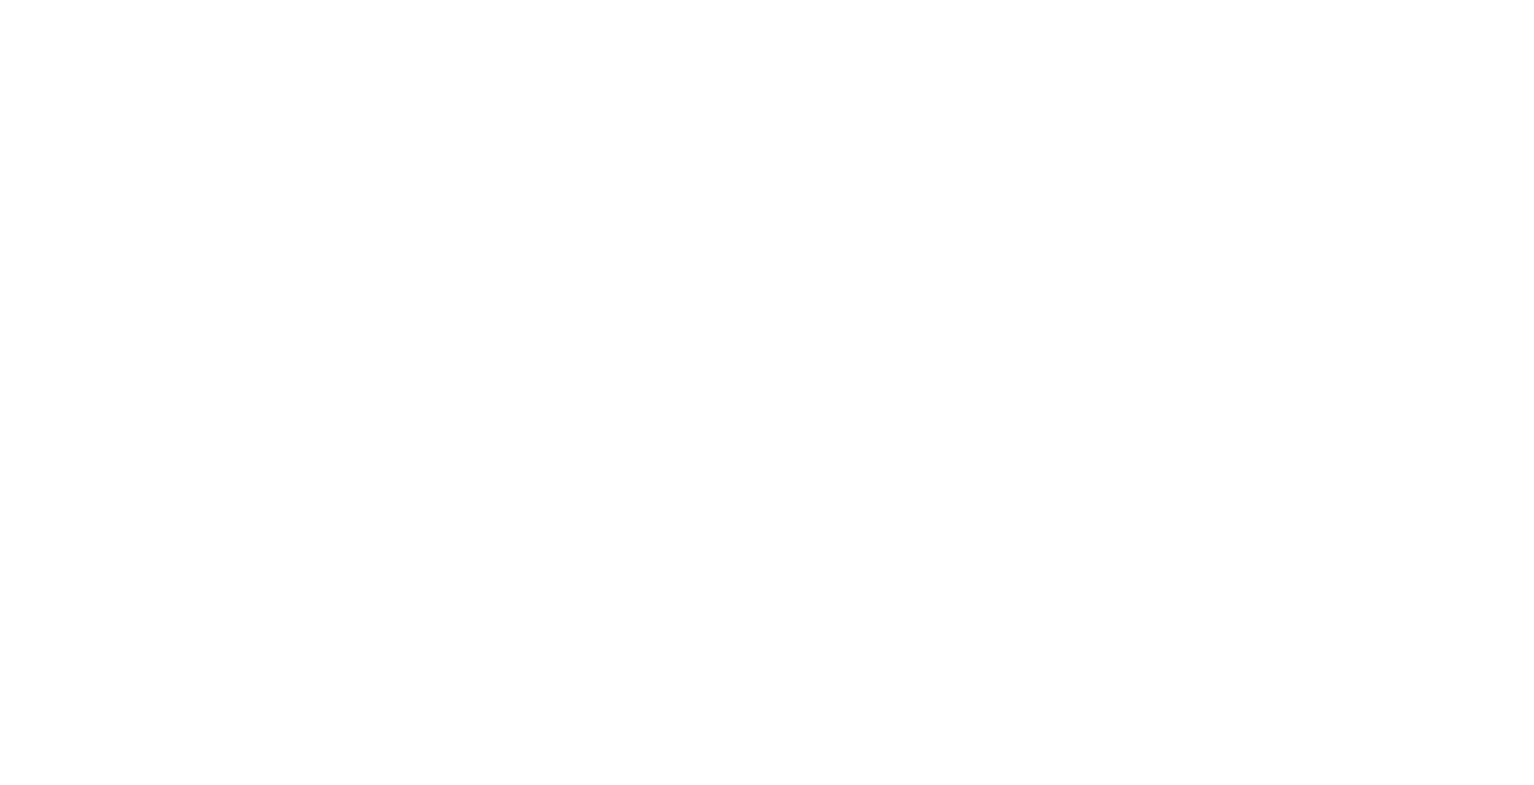 Akeso logo large for dark backgrounds (transparent PNG)